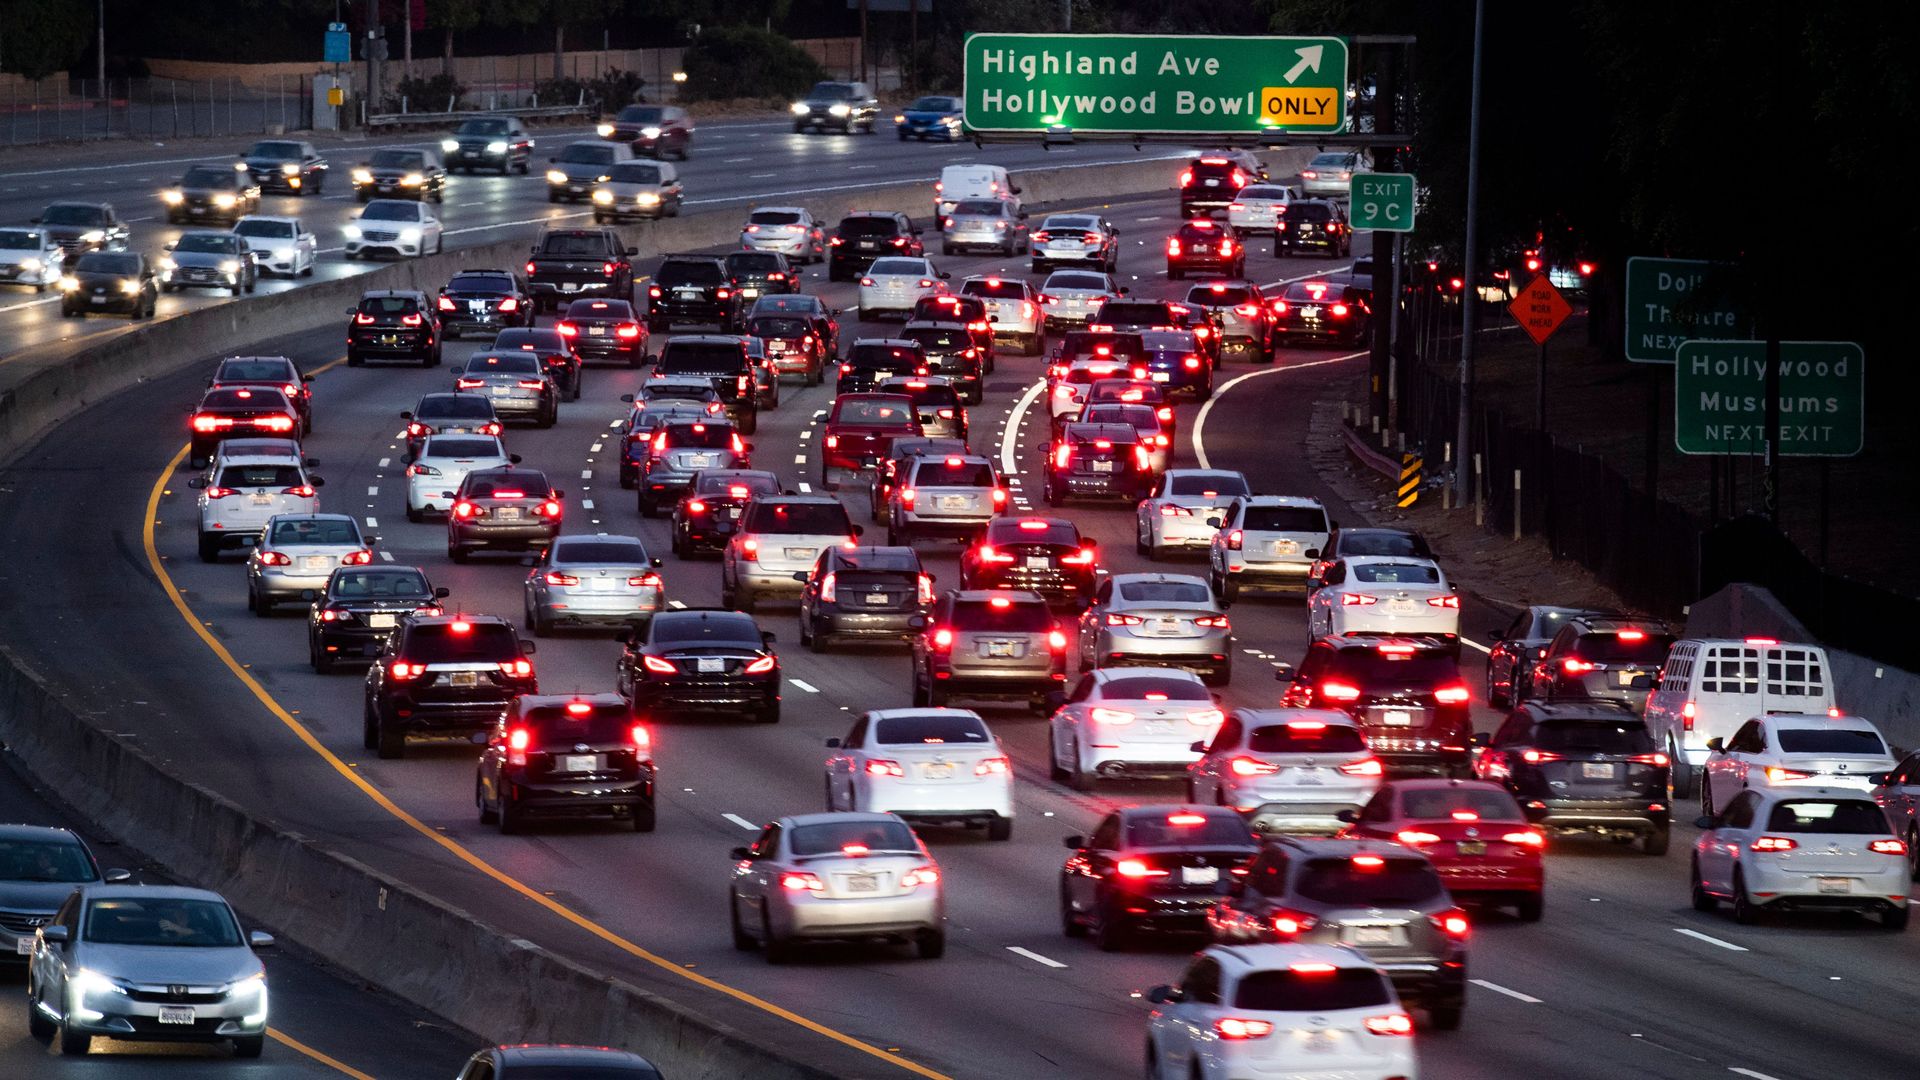 This image shows cars on a California freeway